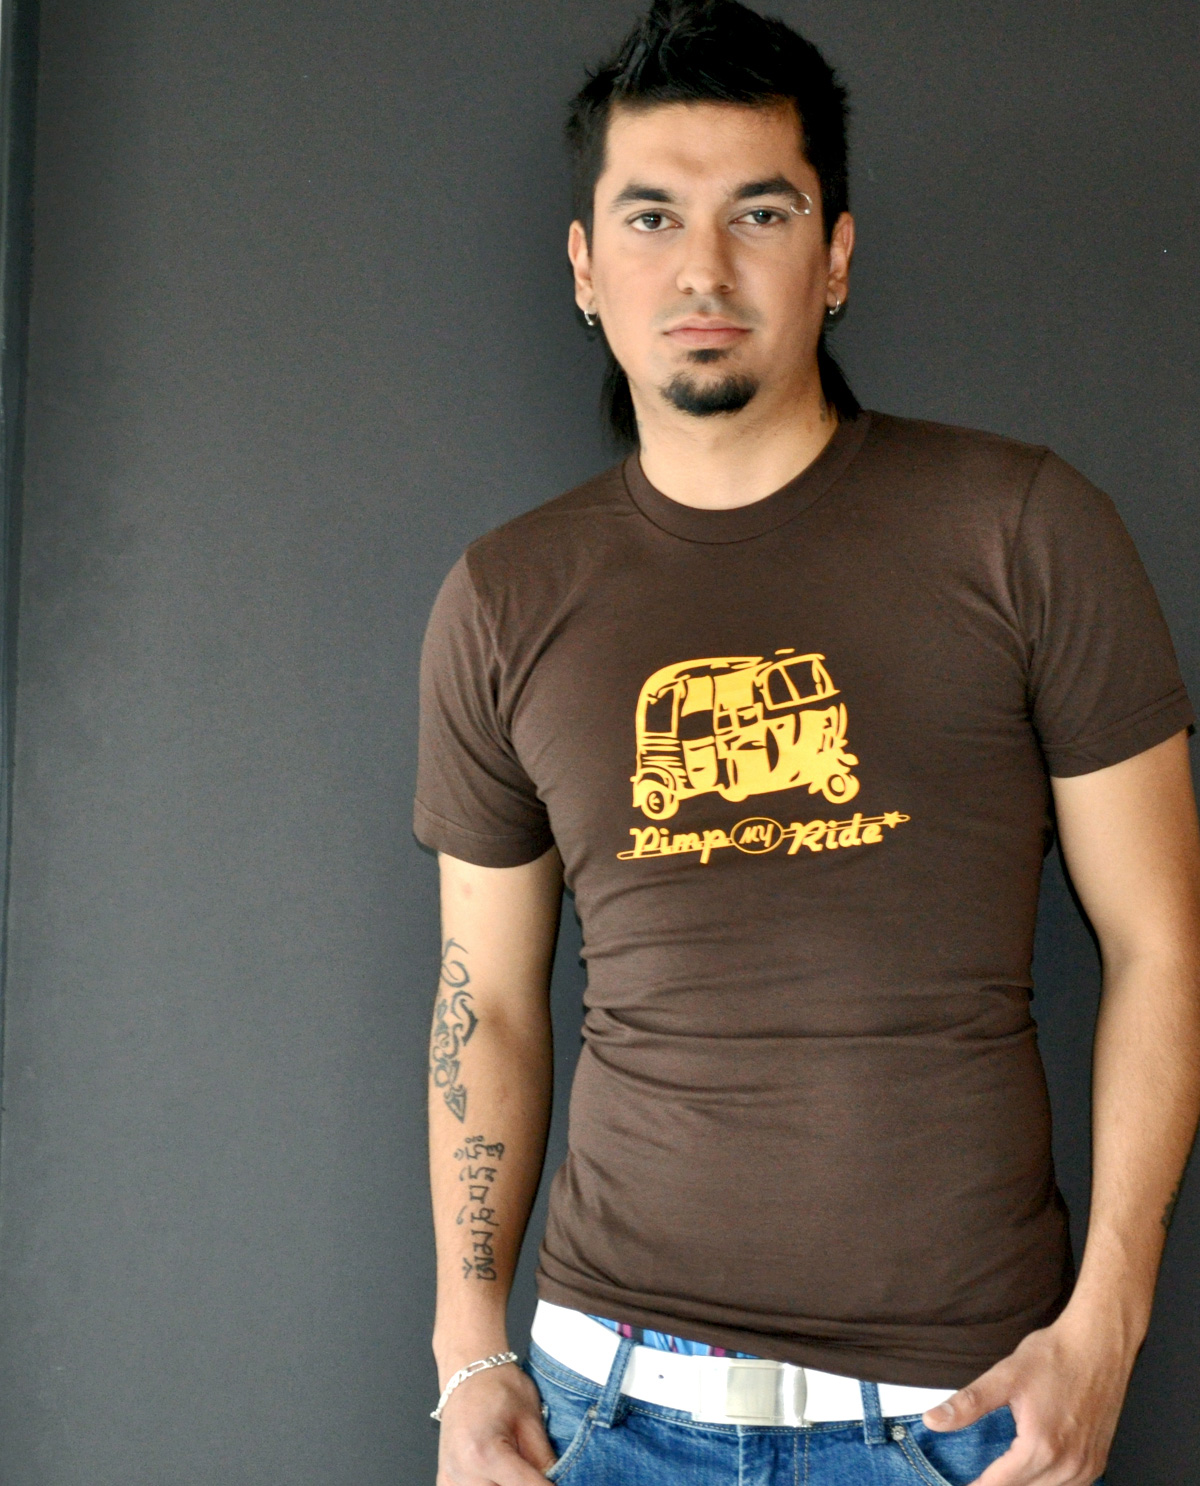 South Asian male model wearing Pimp My Ride illustrated design printed on SoftStyle brown American Apparel Jersey T.shirt fitted t.shirt. South Asian Desi Themed Graphic Design t.shirts by Brown Man Clothing Co.